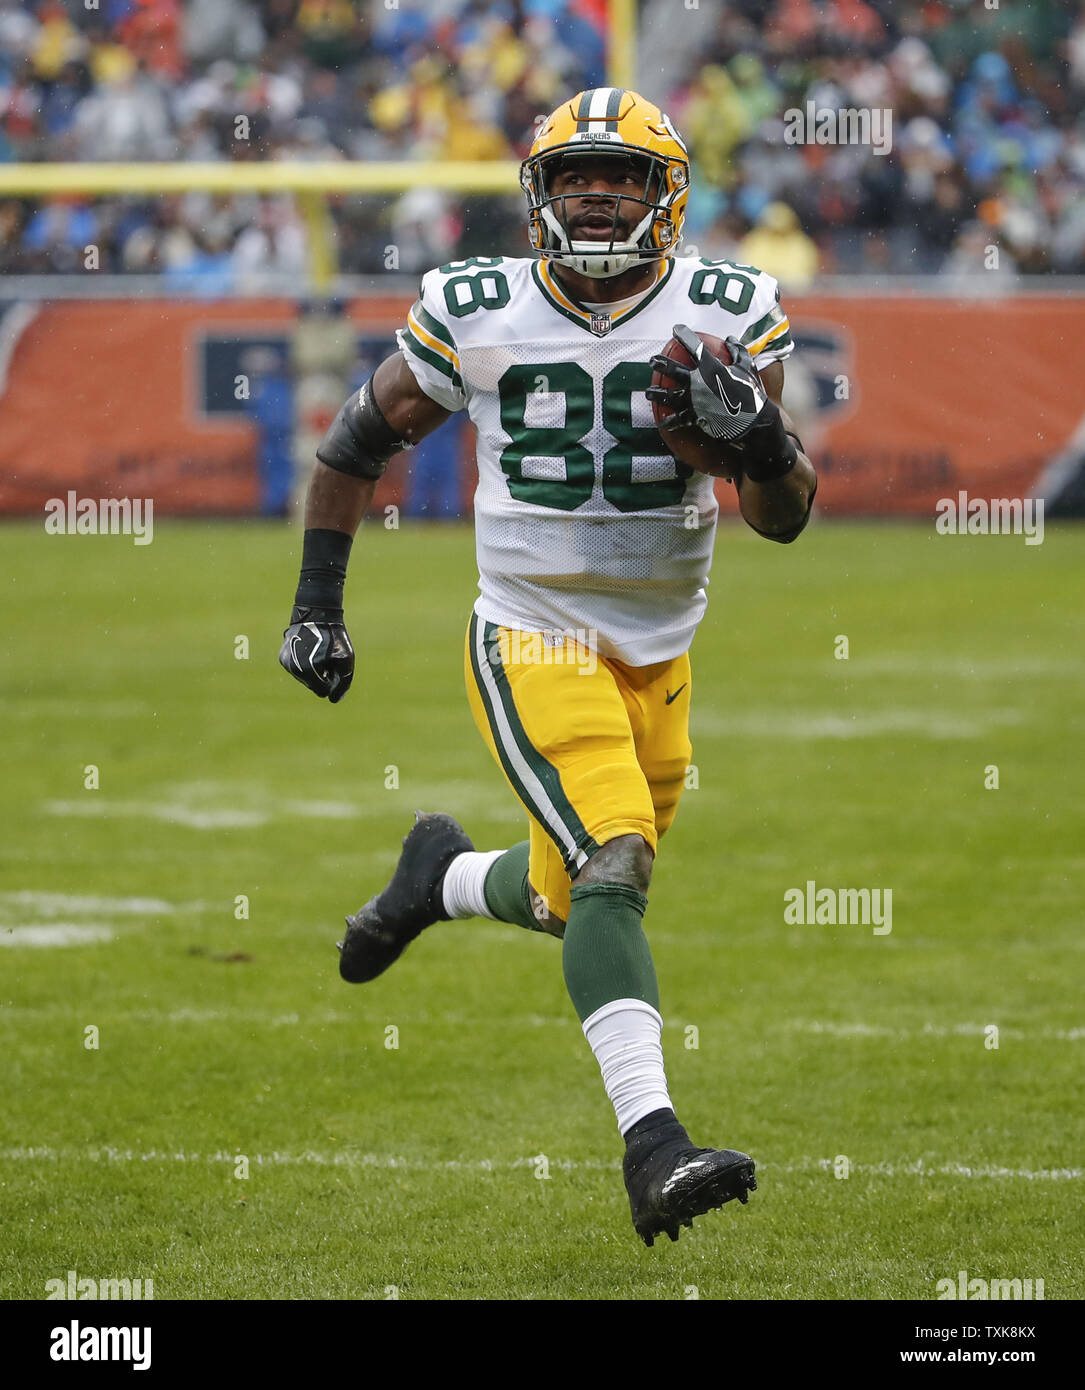 Green Bay Packers running back Ty Montgomery (88) runs for a touchdown  against the Chicago Bears